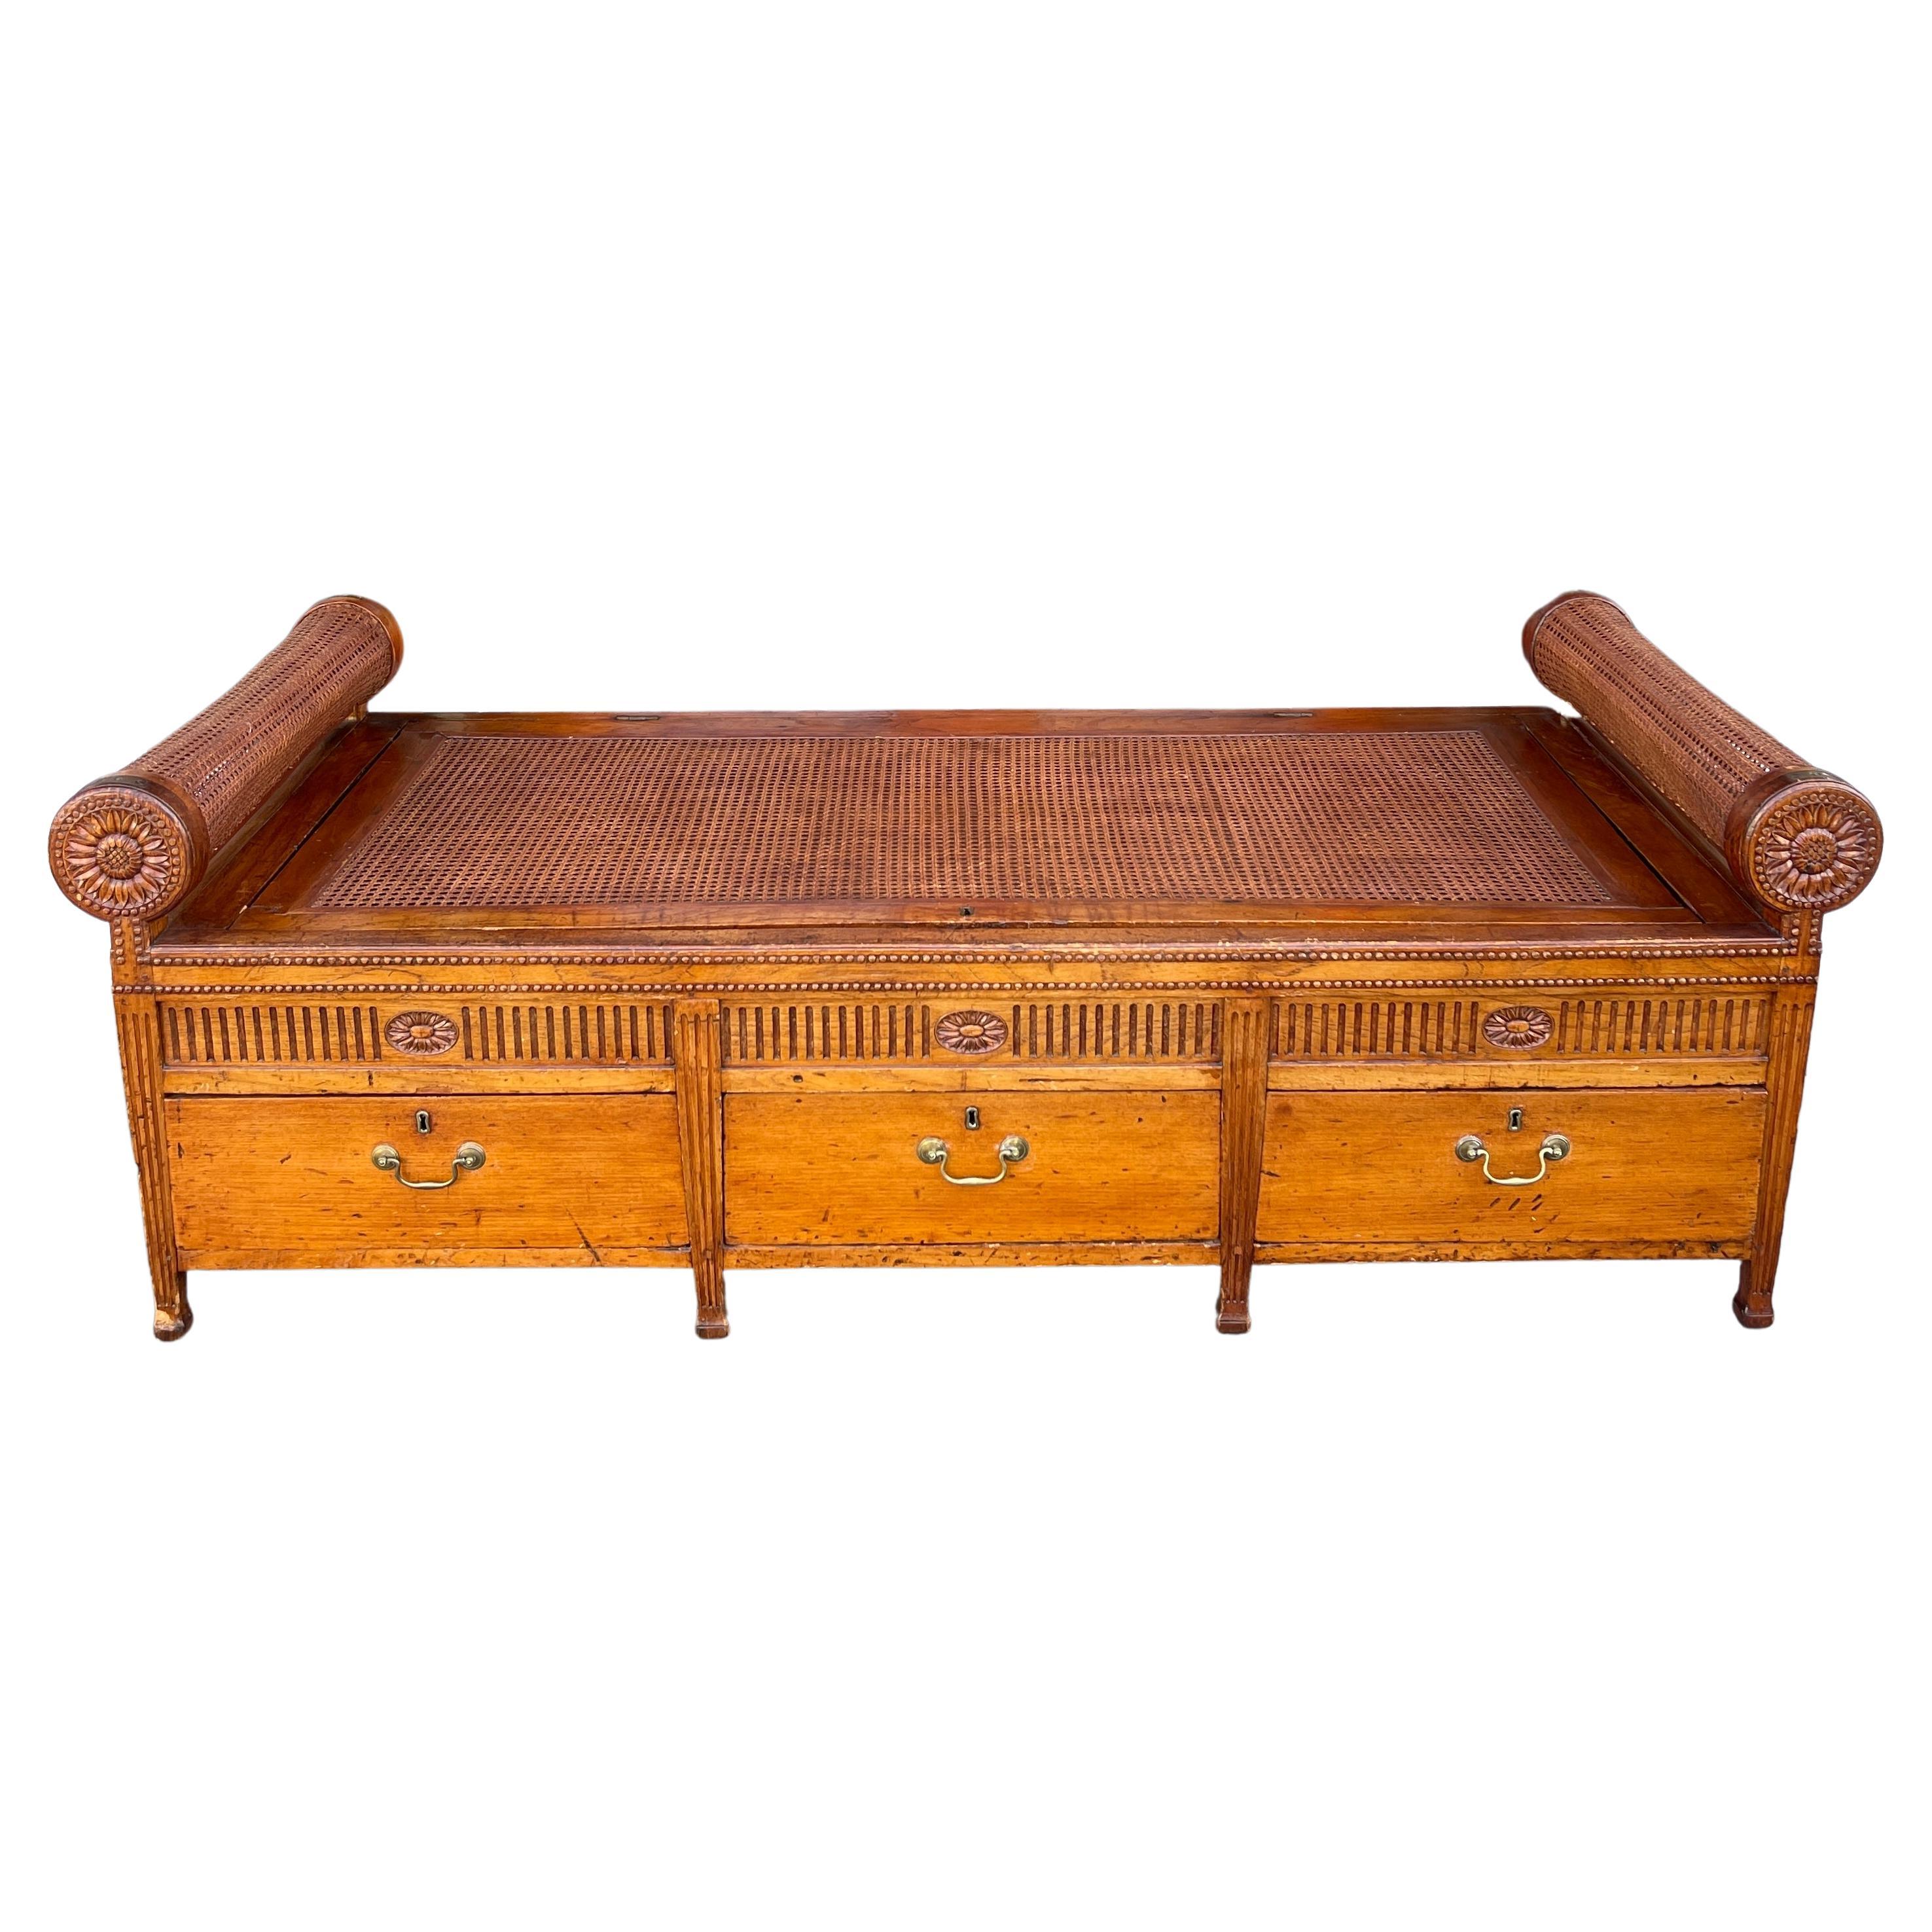 Cane and hardwood China Trade day bed with rolled arms c.1820 For Sale